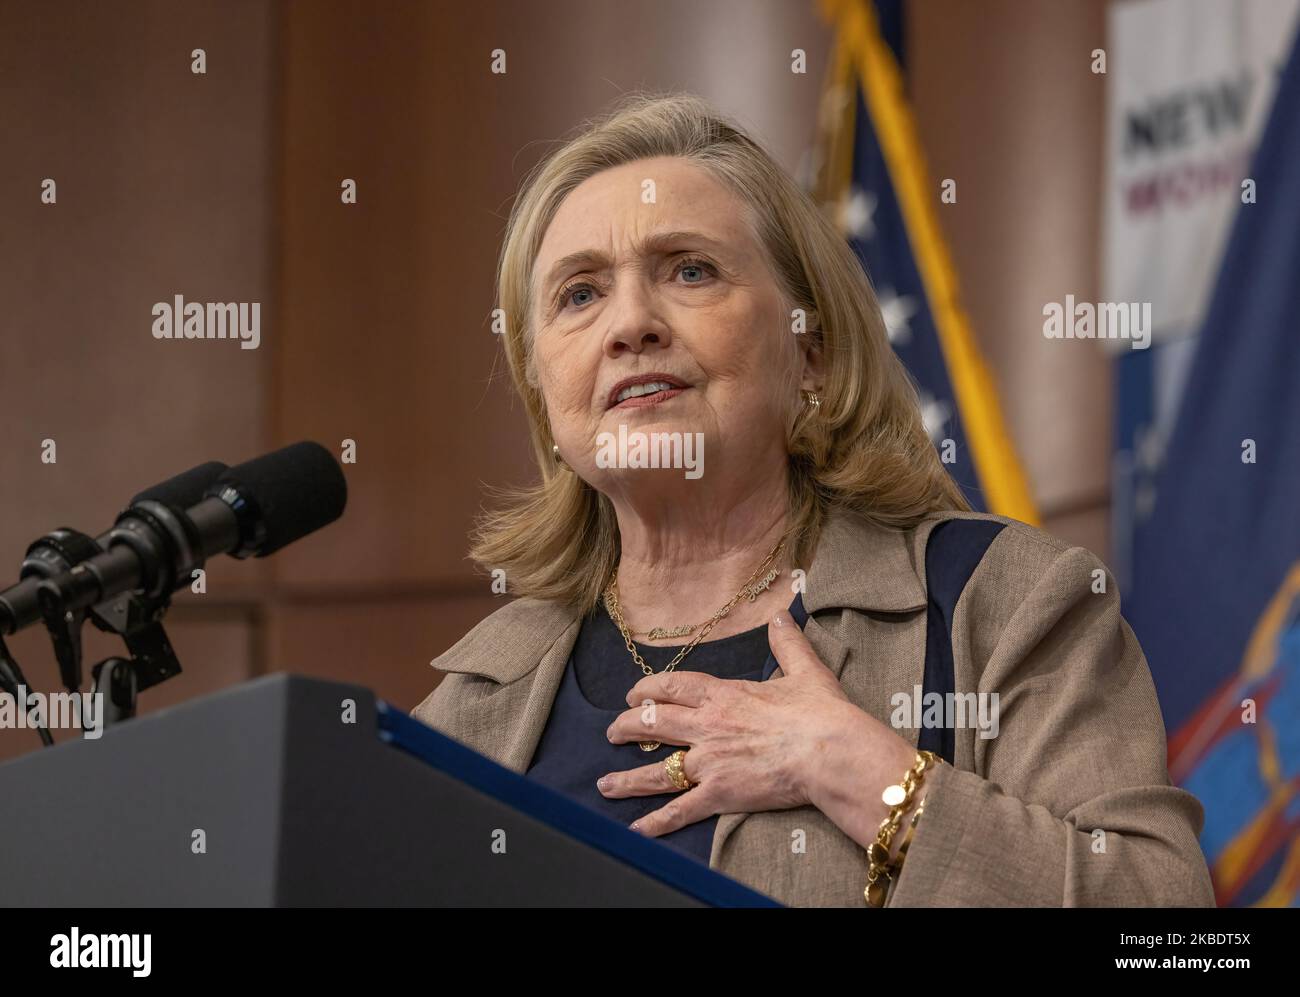 NEW YORK, N.Y. – November 3, 2022: Former Secretary of State Hillary Clinton addresses a campaign rally at Barnard College in New York City. Stock Photo